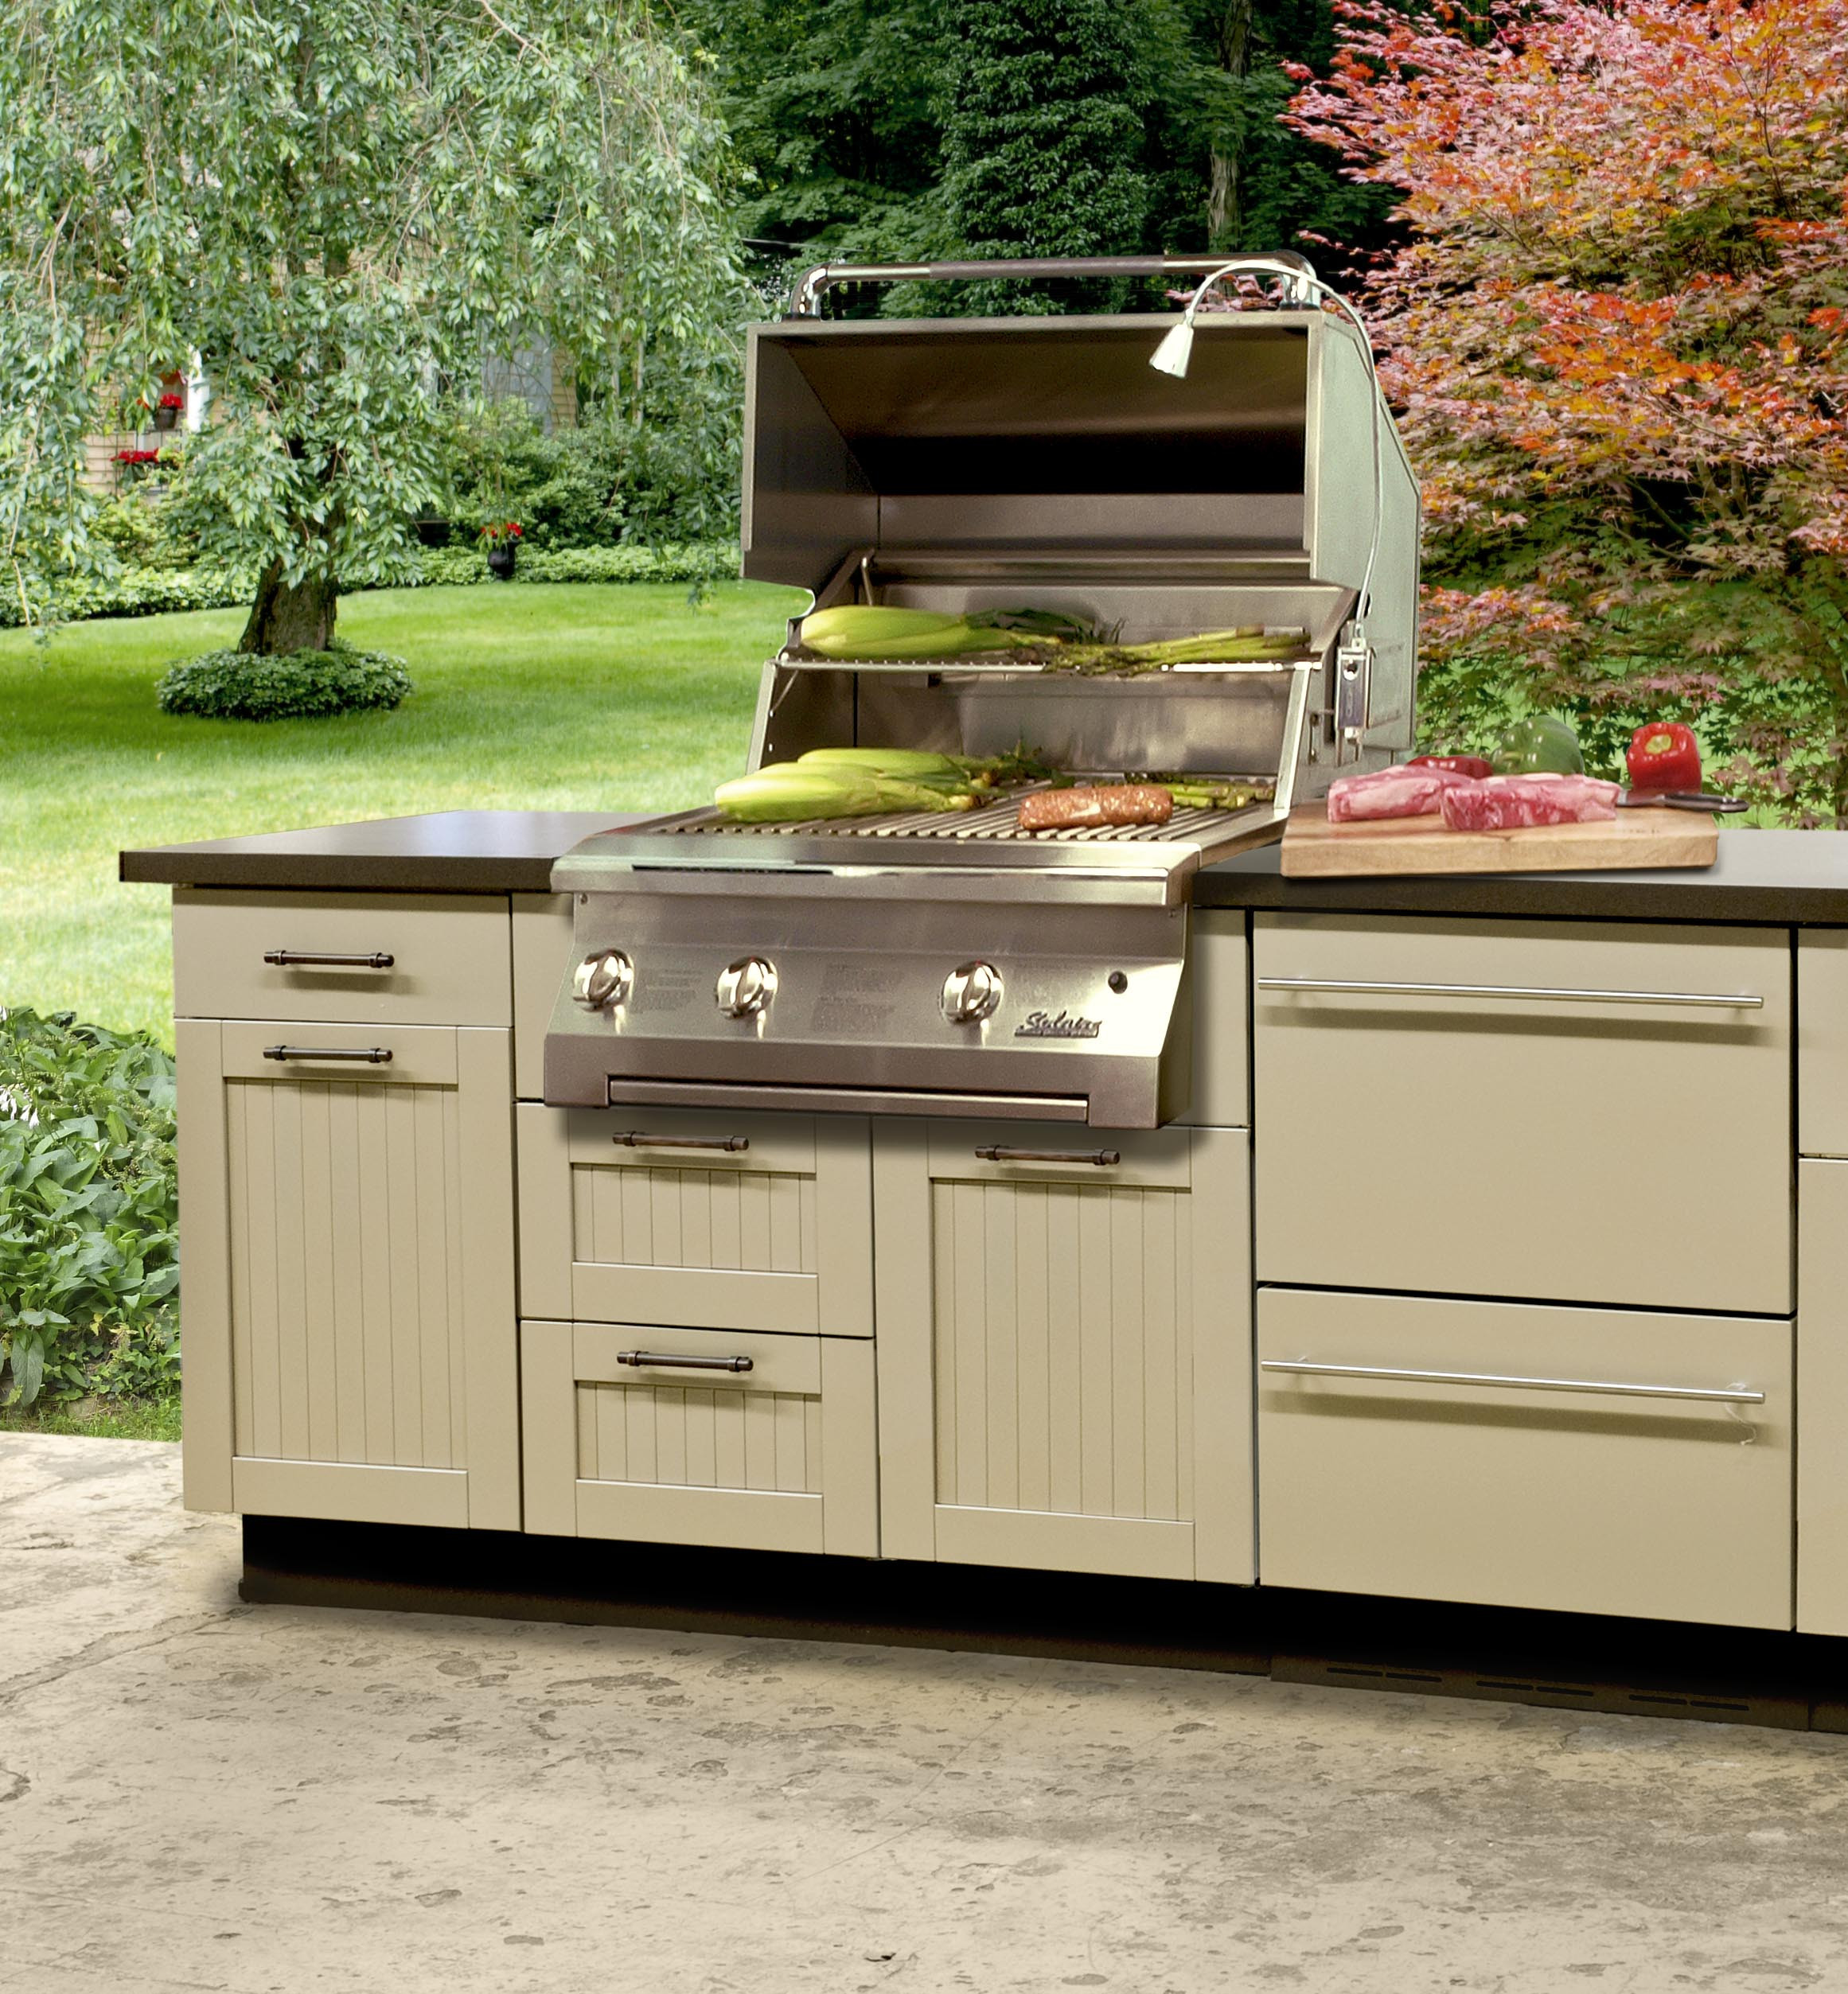 Outdoor Kitchen Cabinet Ideas
 Outdoor kitchen lowes best suited to offer you top notch